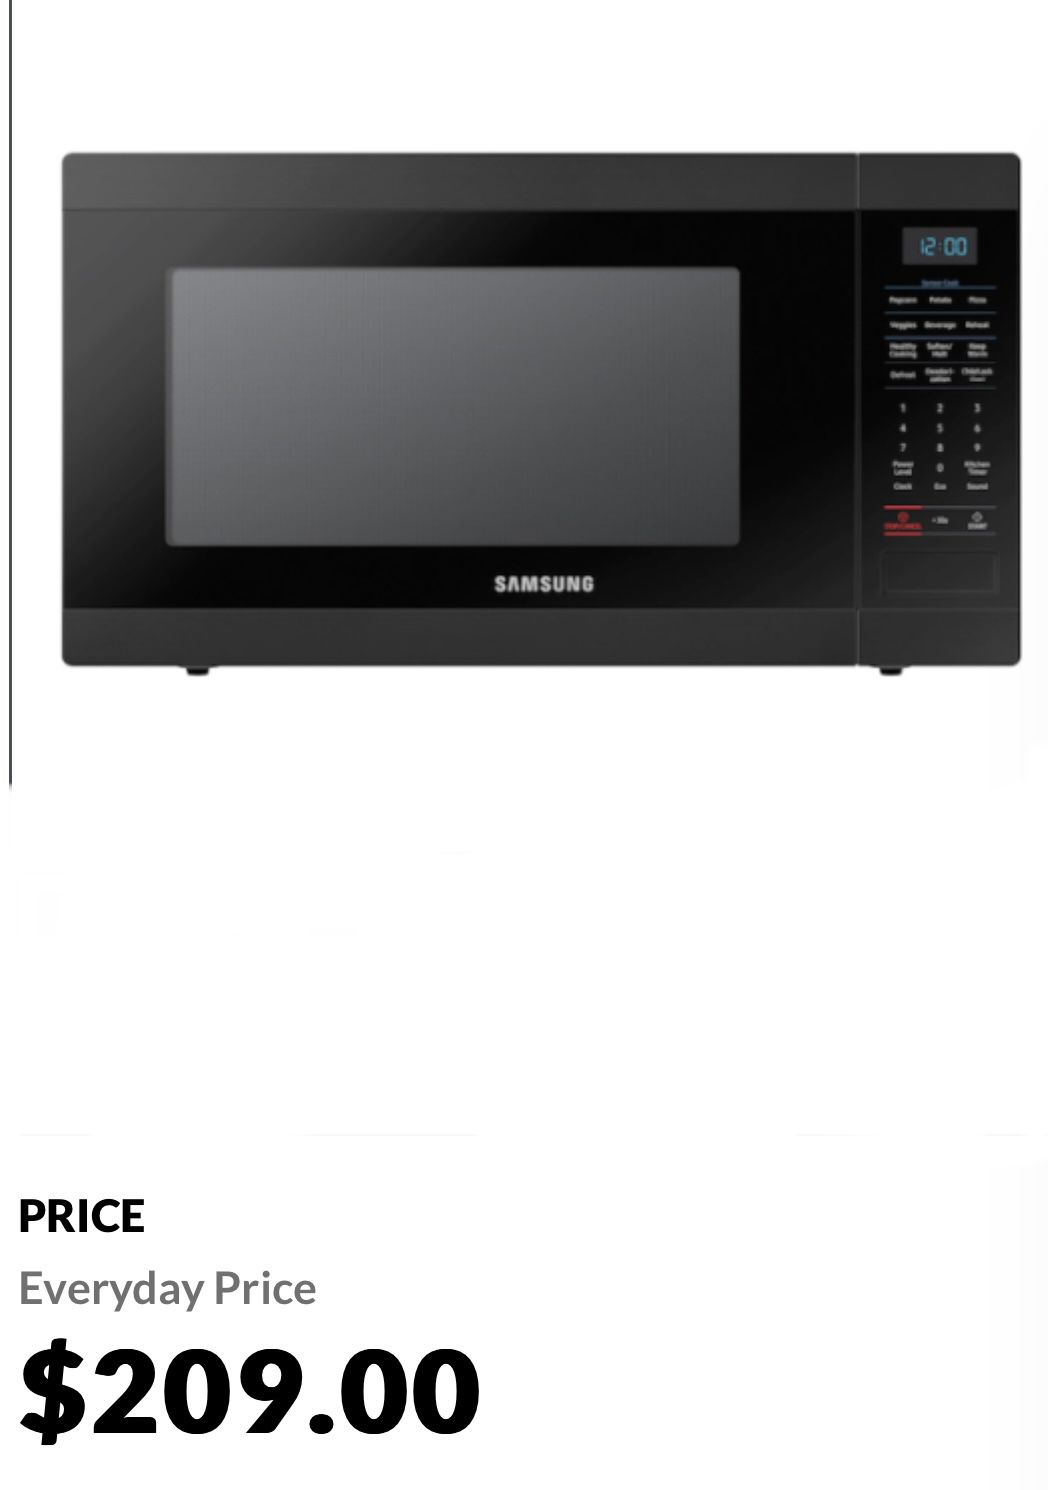 Samsung MS14K6000AG 1.4 cu. ft. Countertop Microwave with Sensor Cook